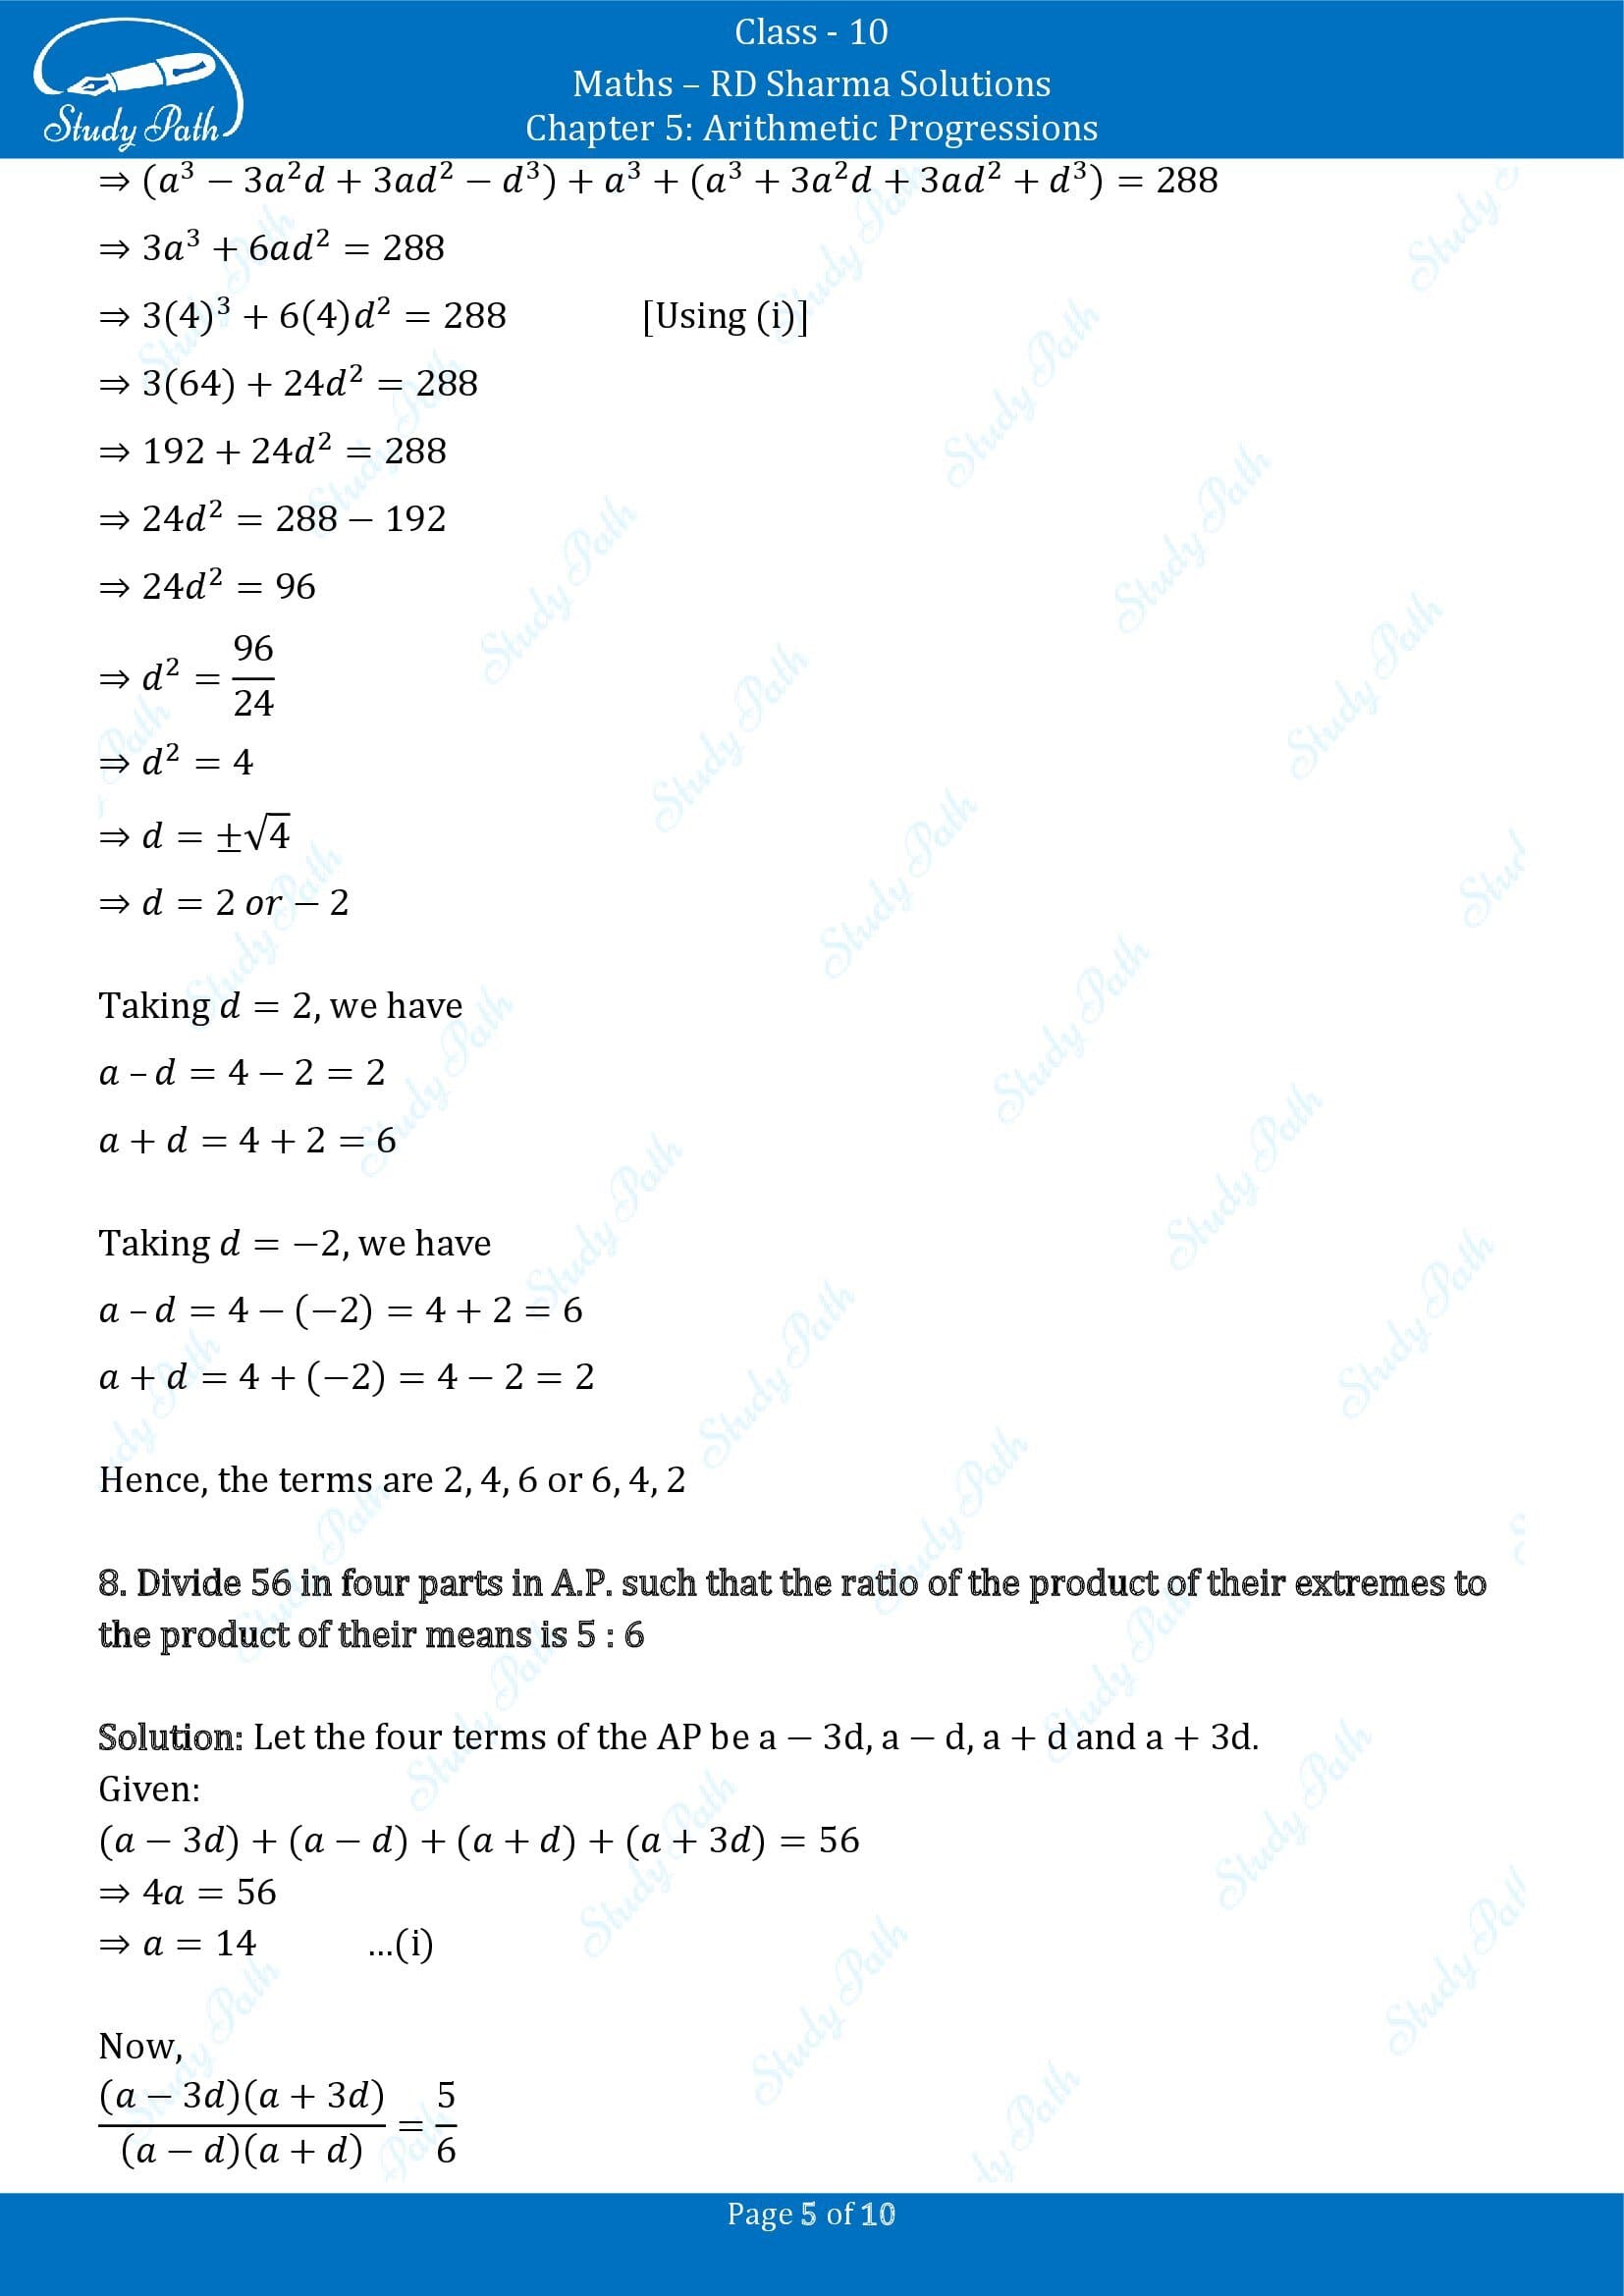 RD Sharma Solutions Class 10 Chapter 5 Arithmetic Progressions Exercise 5.5 00005